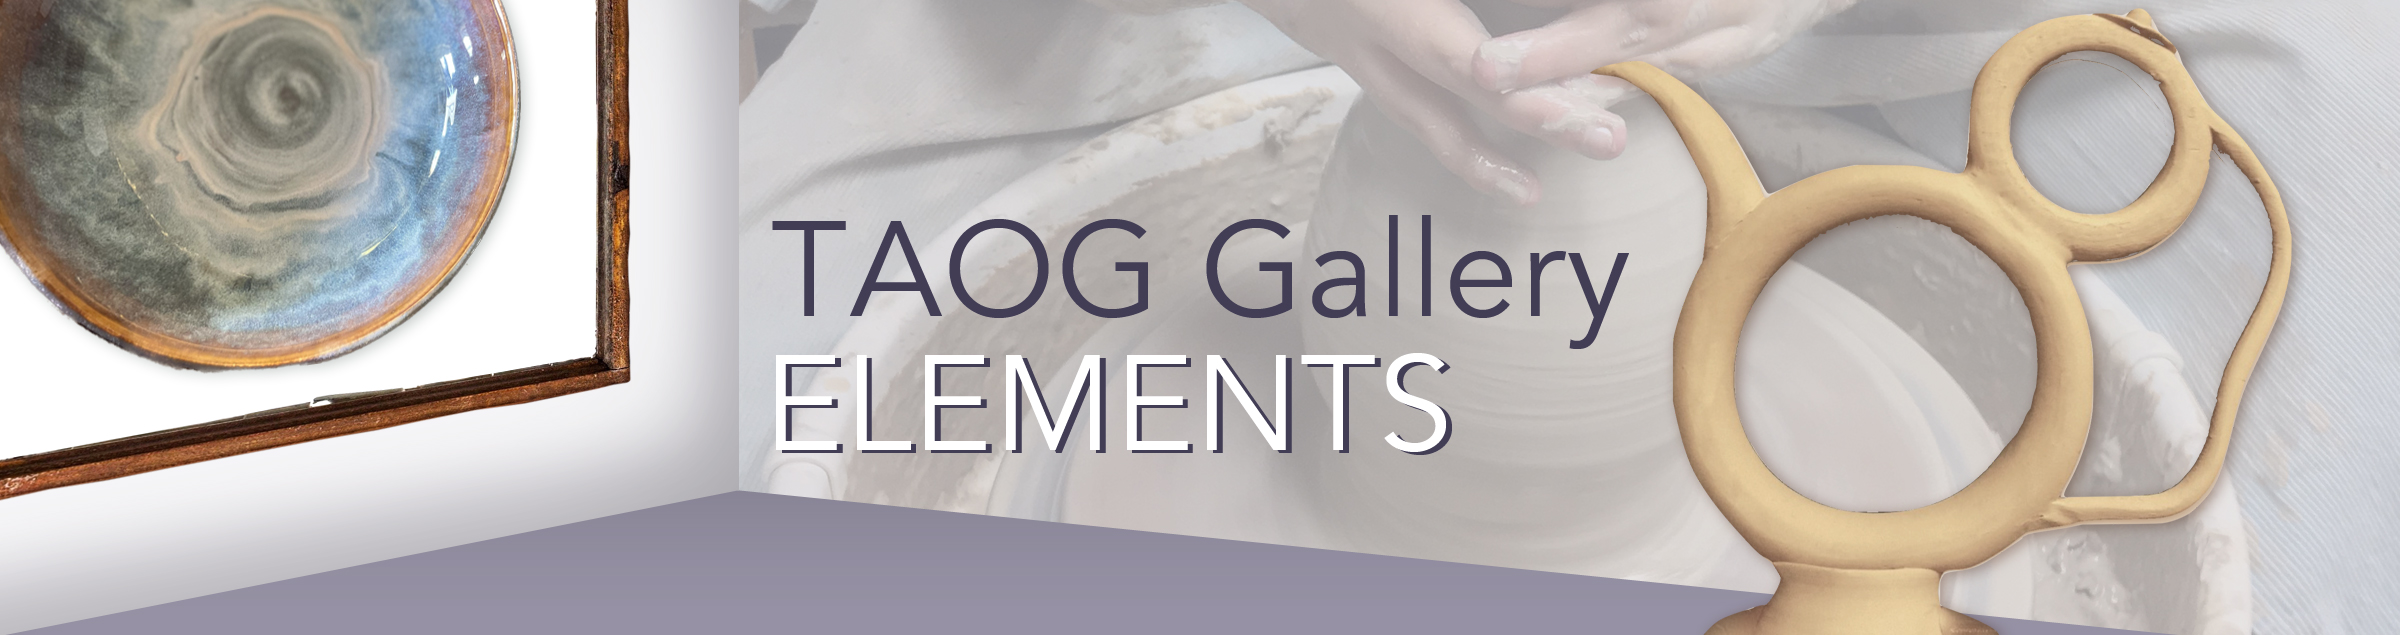 TAOG Gallery Elements